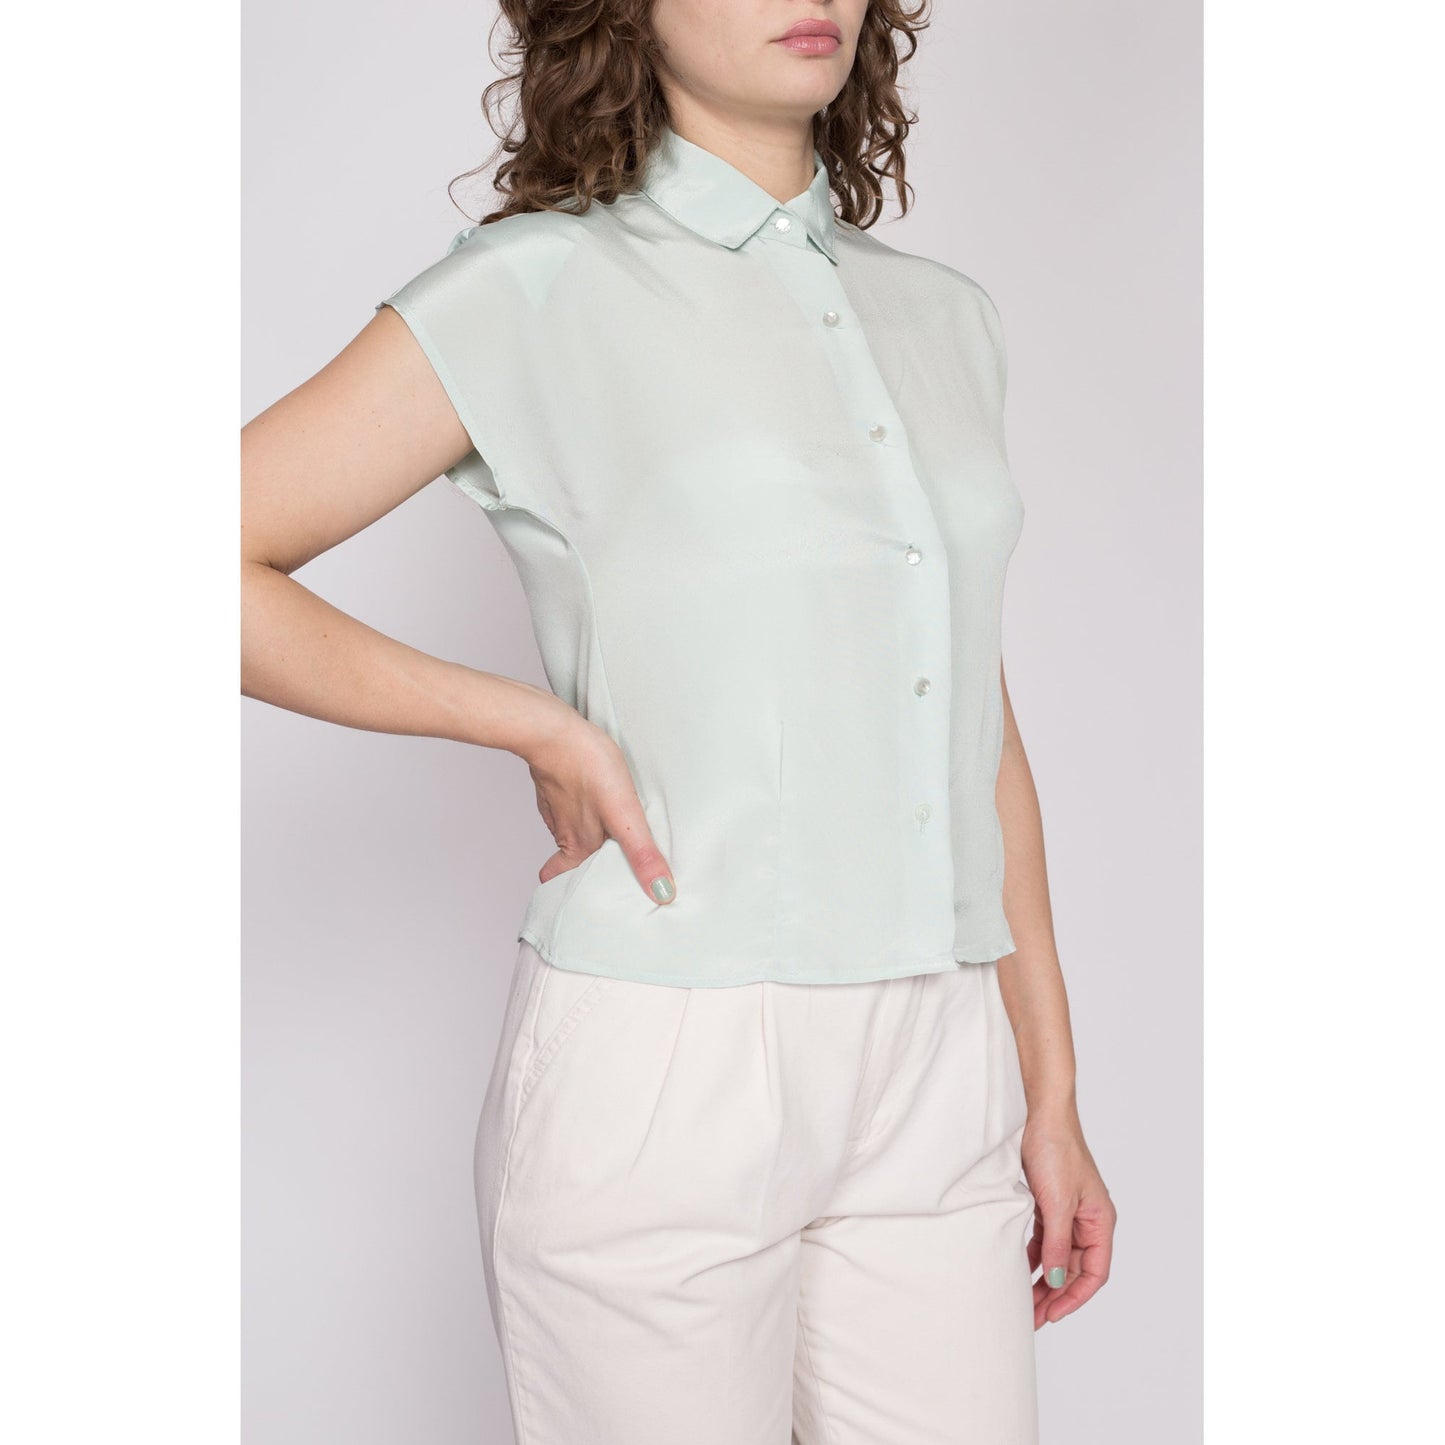 Small 80s Pastel Green Cap Sleeve Blouse | Vintage Shiny Collared Button Up Shirt